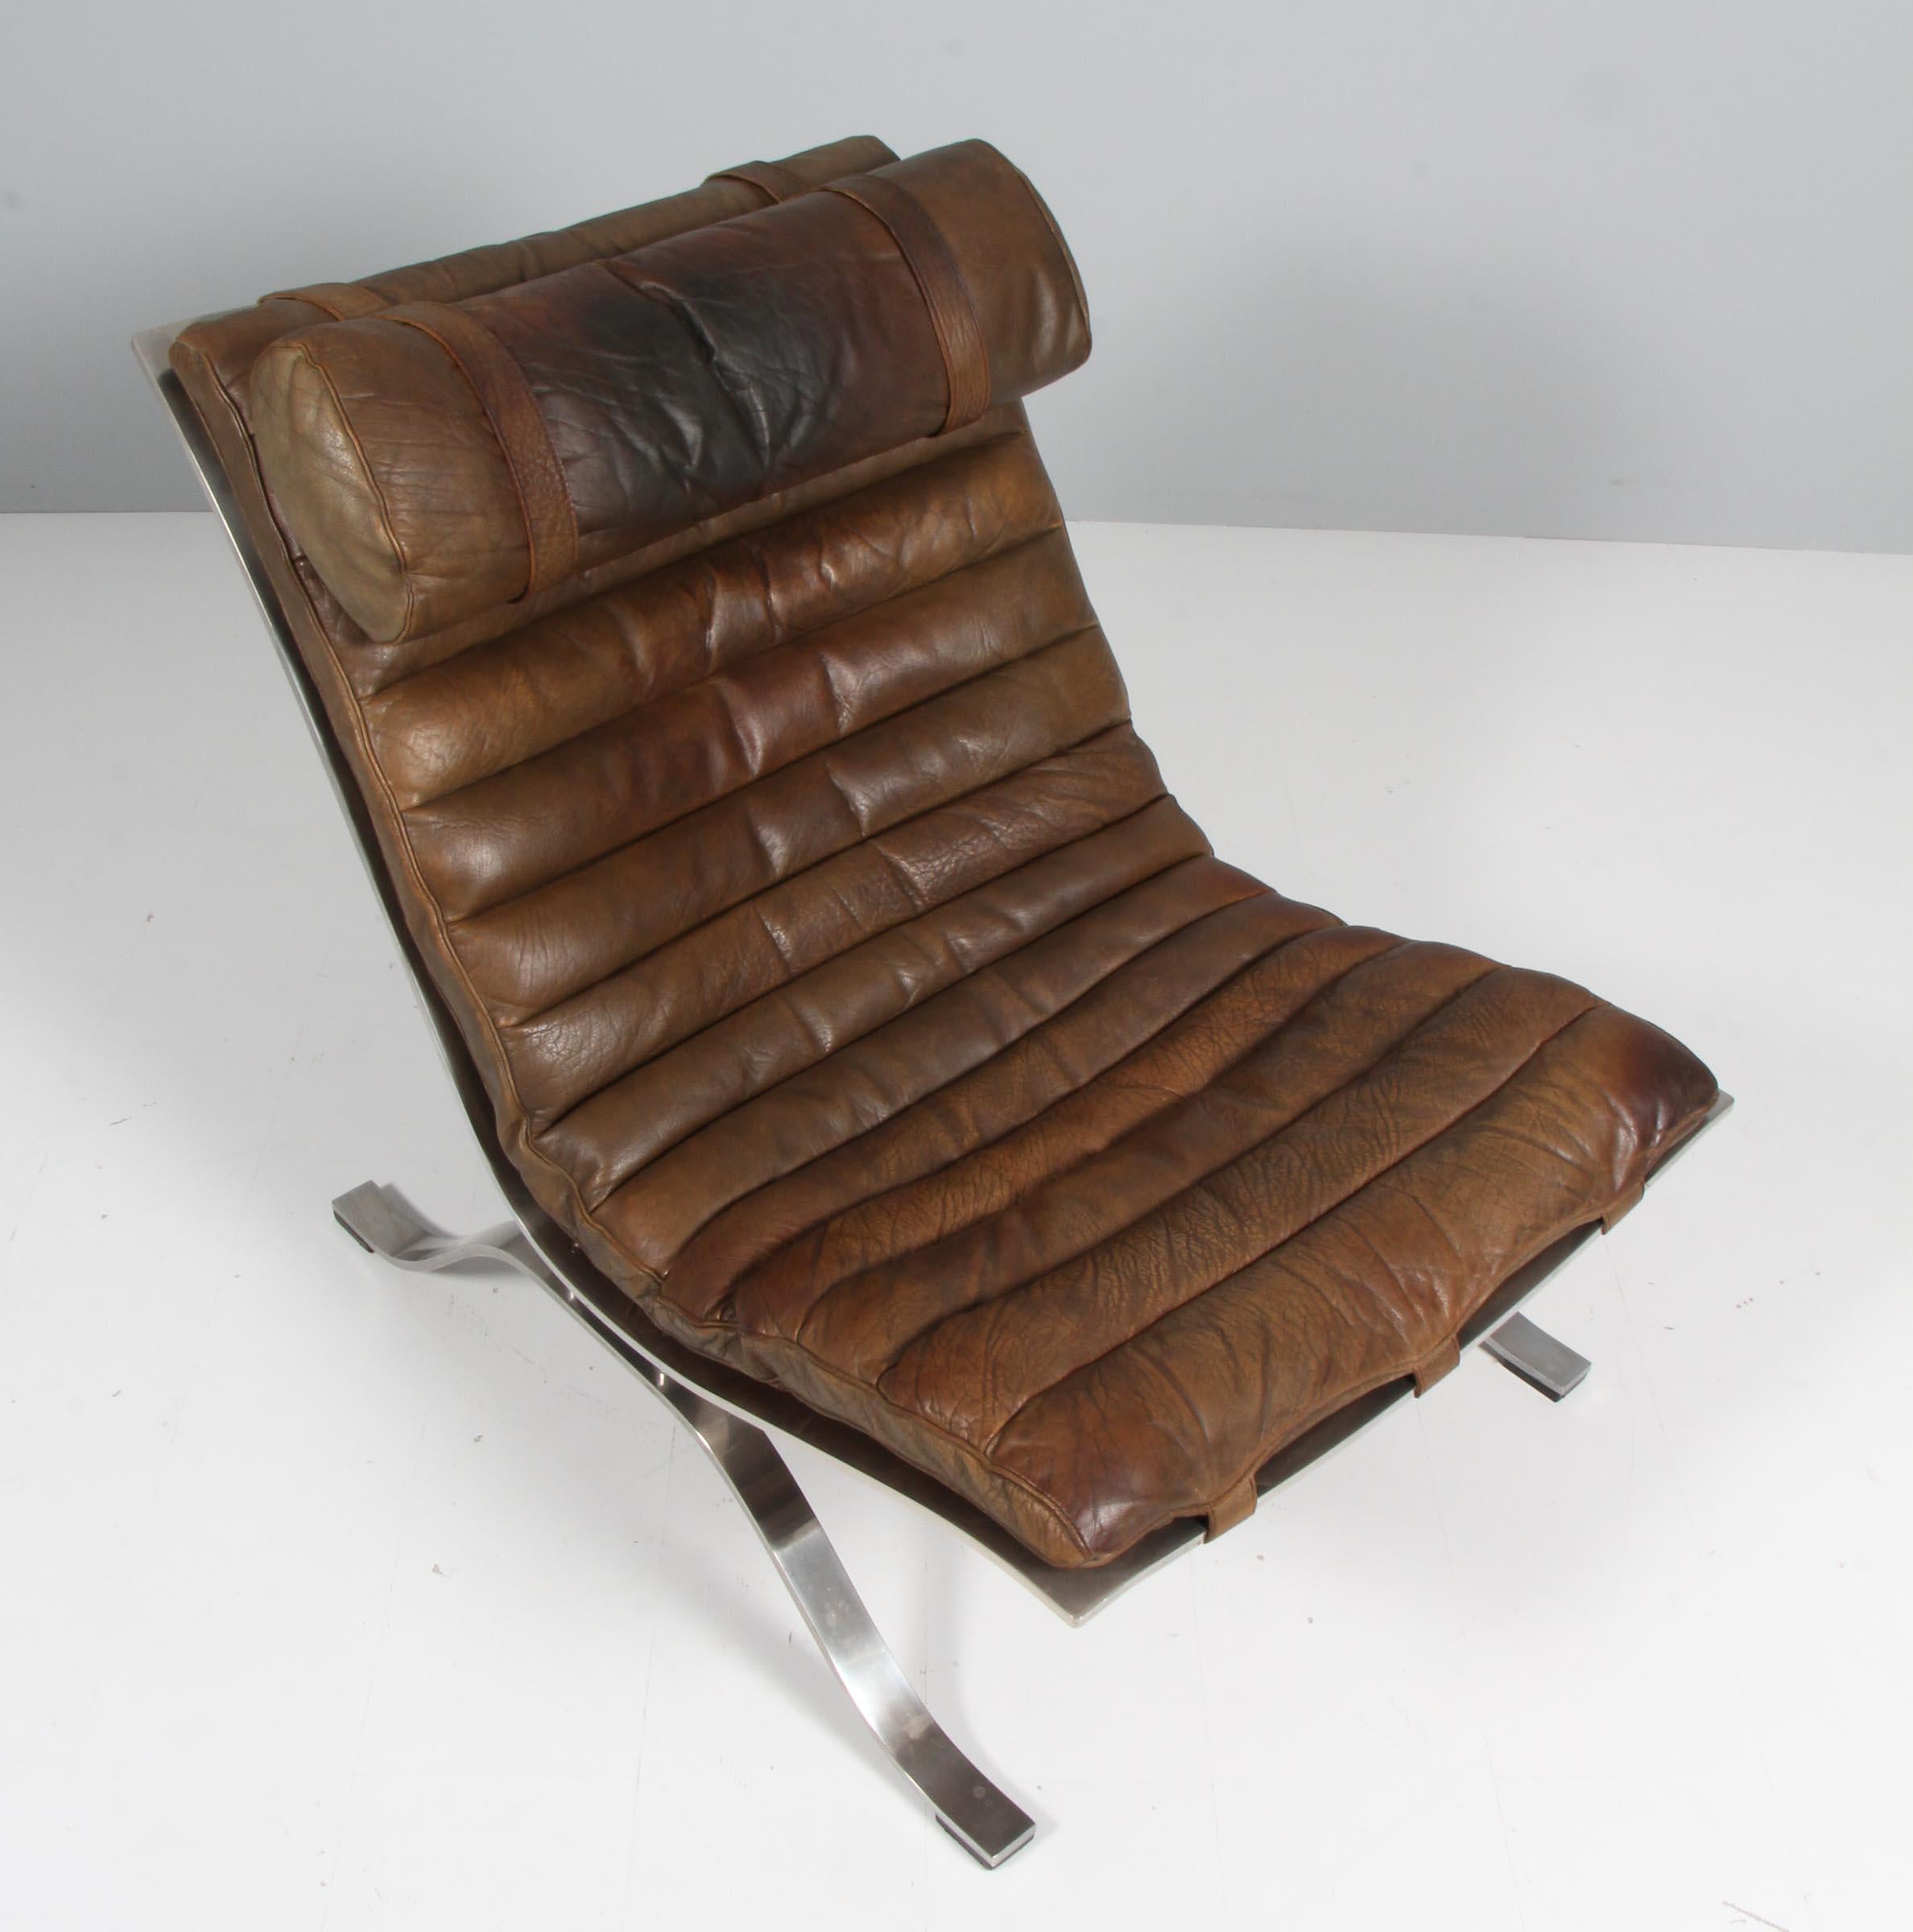 Low slung steel framed leather 'Ari' Lounge chair by Swedish designer Arne Norell from 1966.
This vintage lounge chair comes with original patinated leathe
The soft high gloss chromed frame comes in wonderful original condition and compliments the